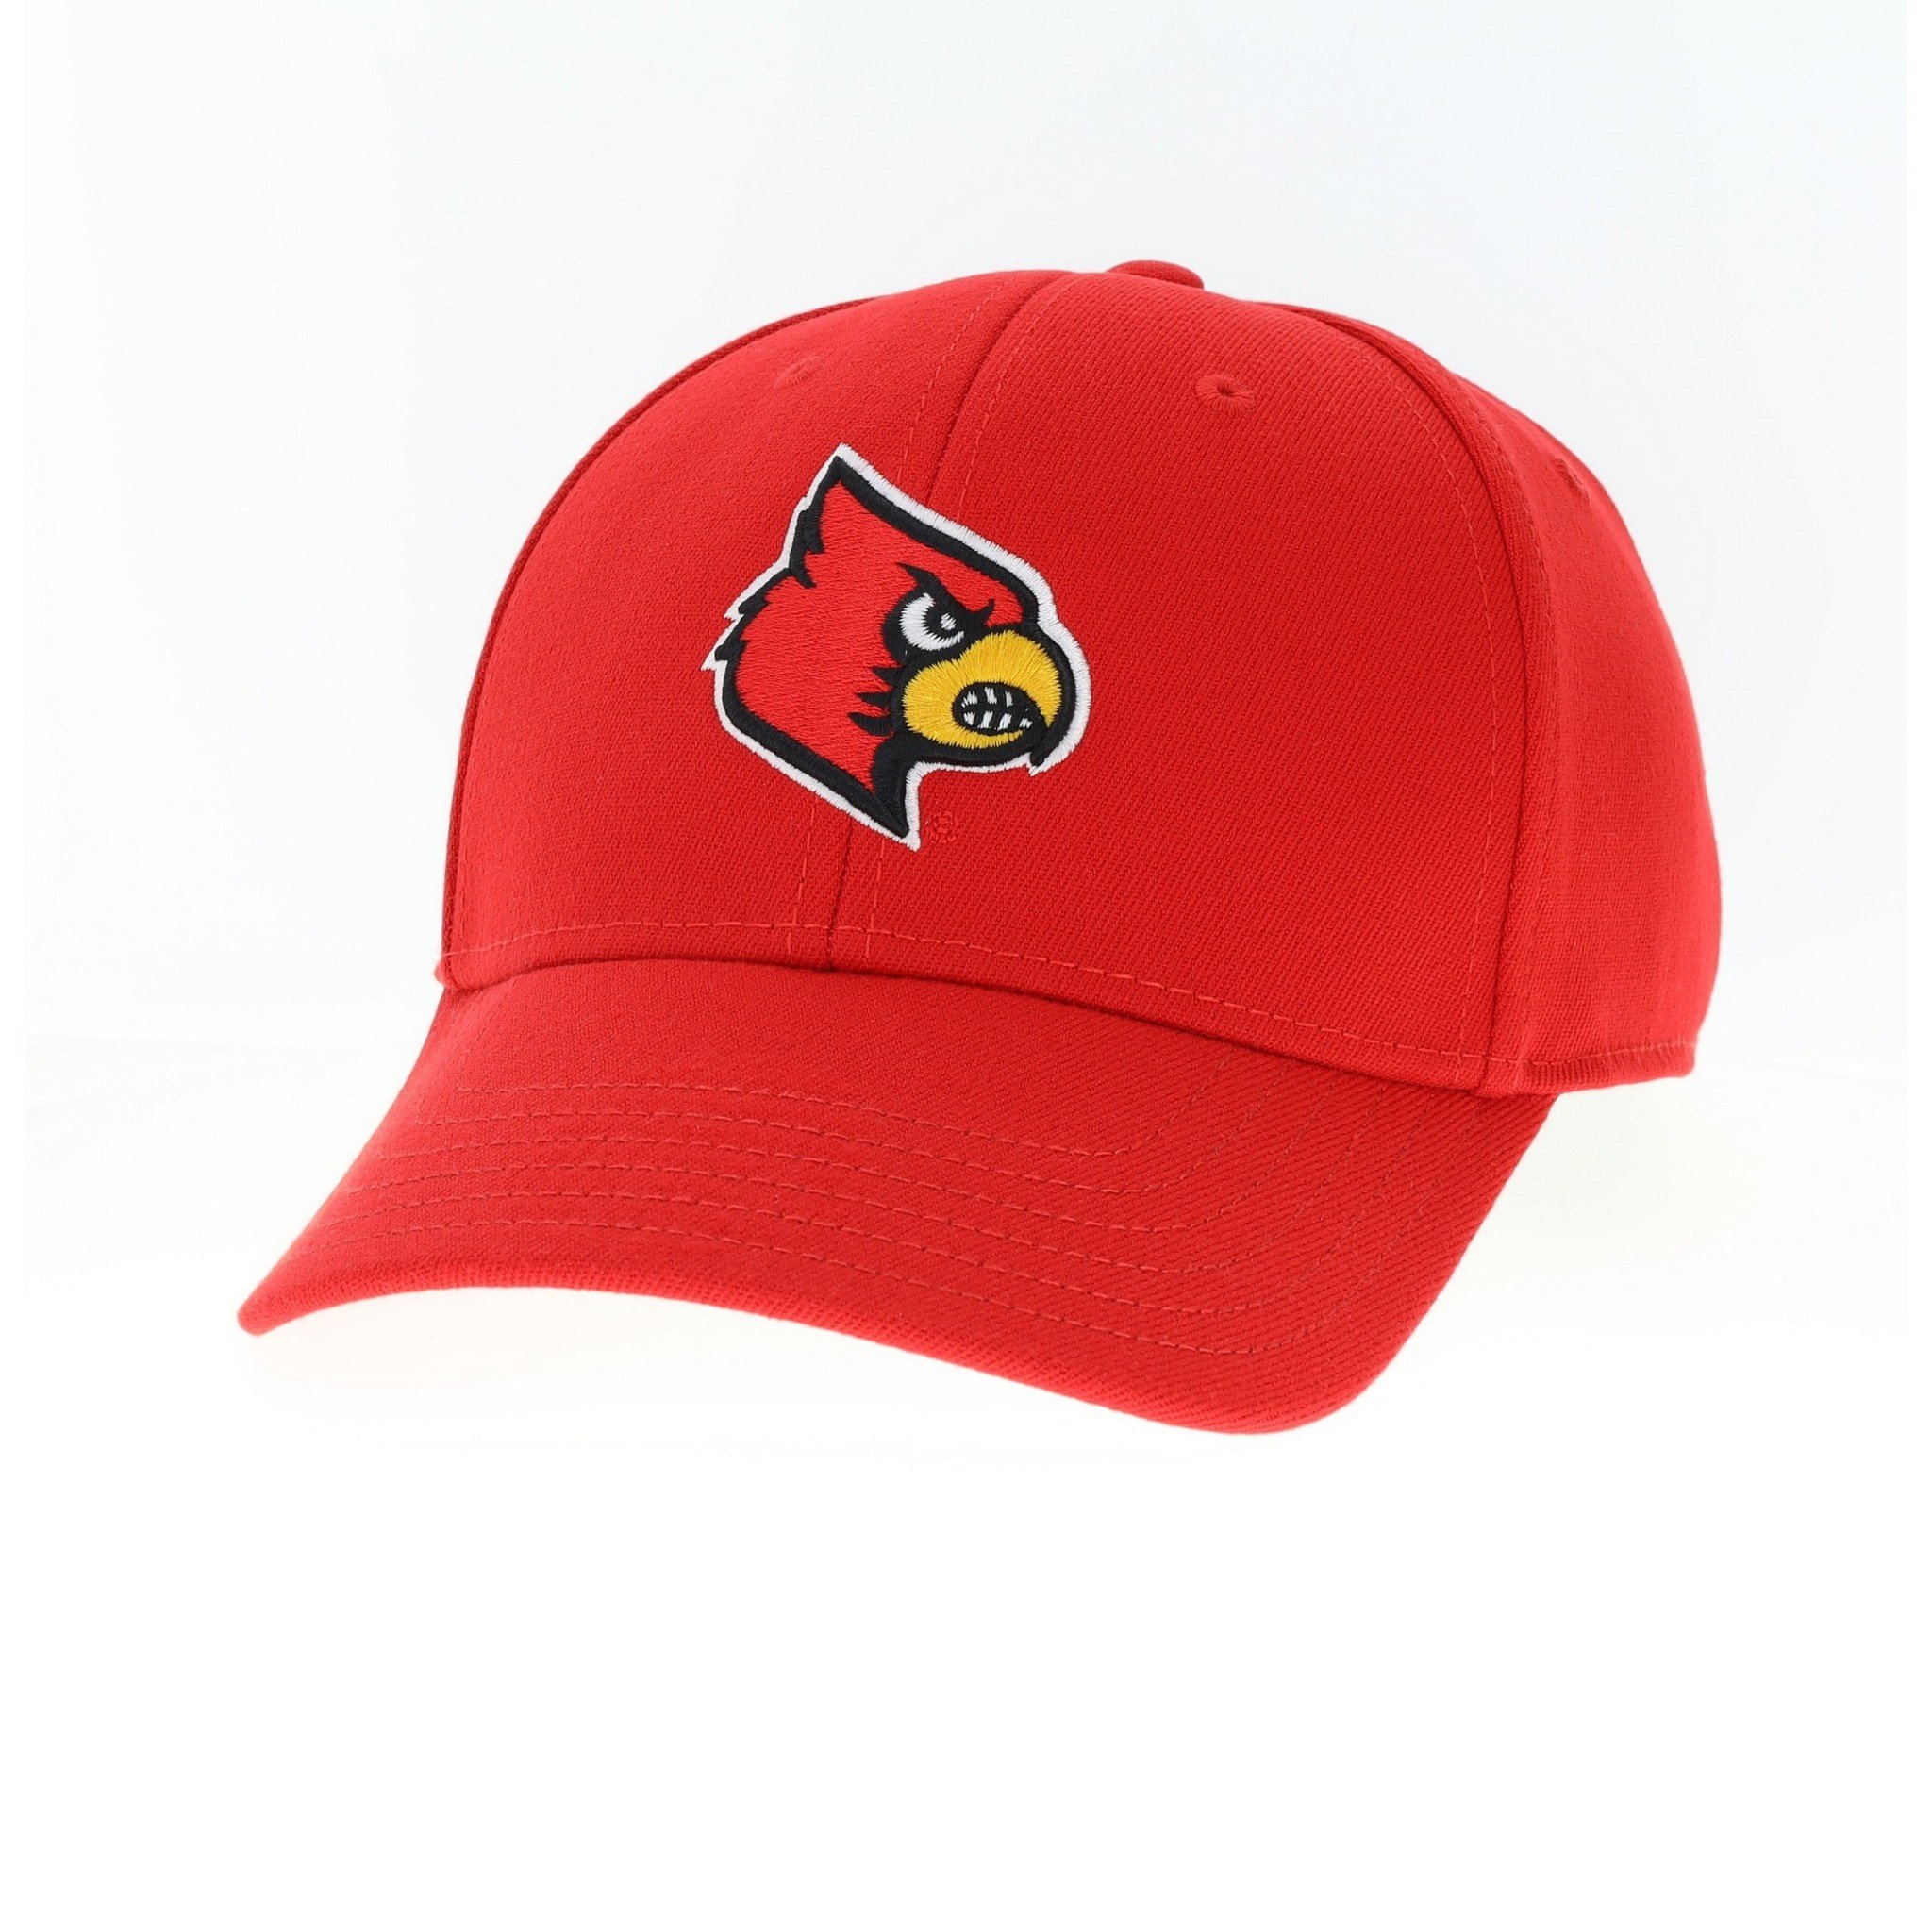 HAT, ADJUSTABLE, KNOXVILLE, RED/WHITE, UL - JD Becker's UK & UofL